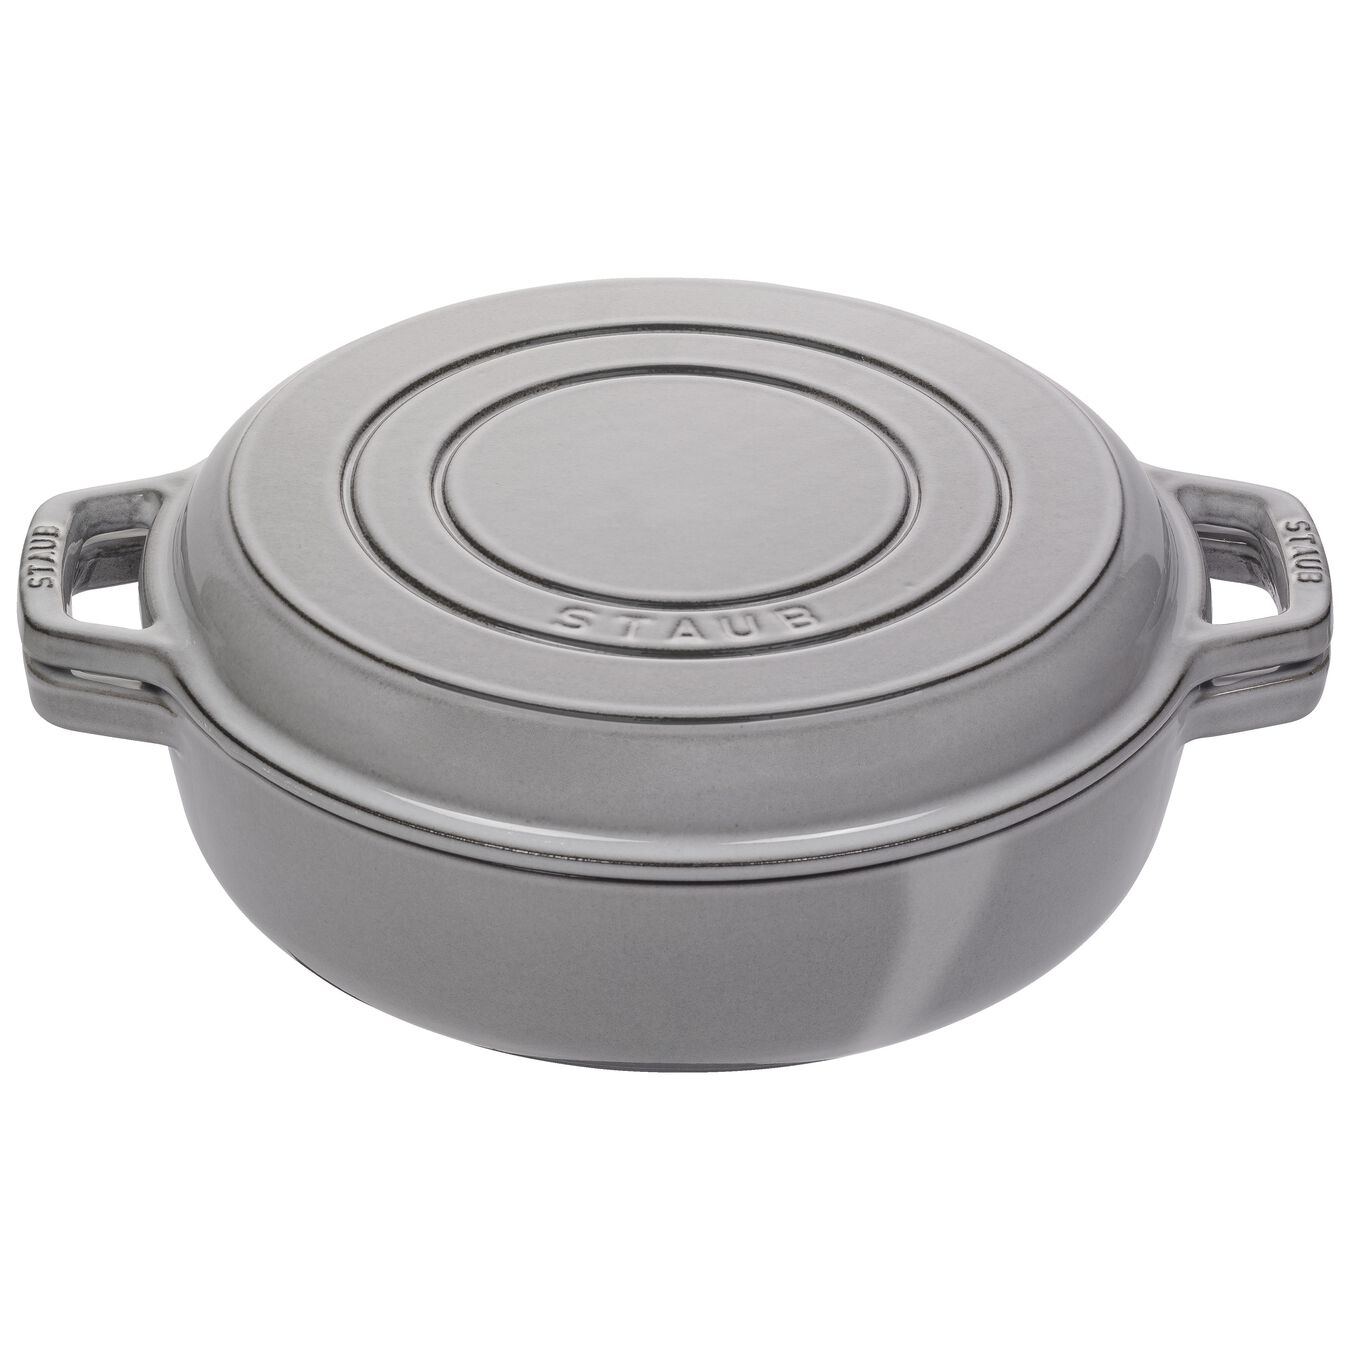 3.5 qt, Braise + grill, graphite grey - Visual Imperfections,,large 2